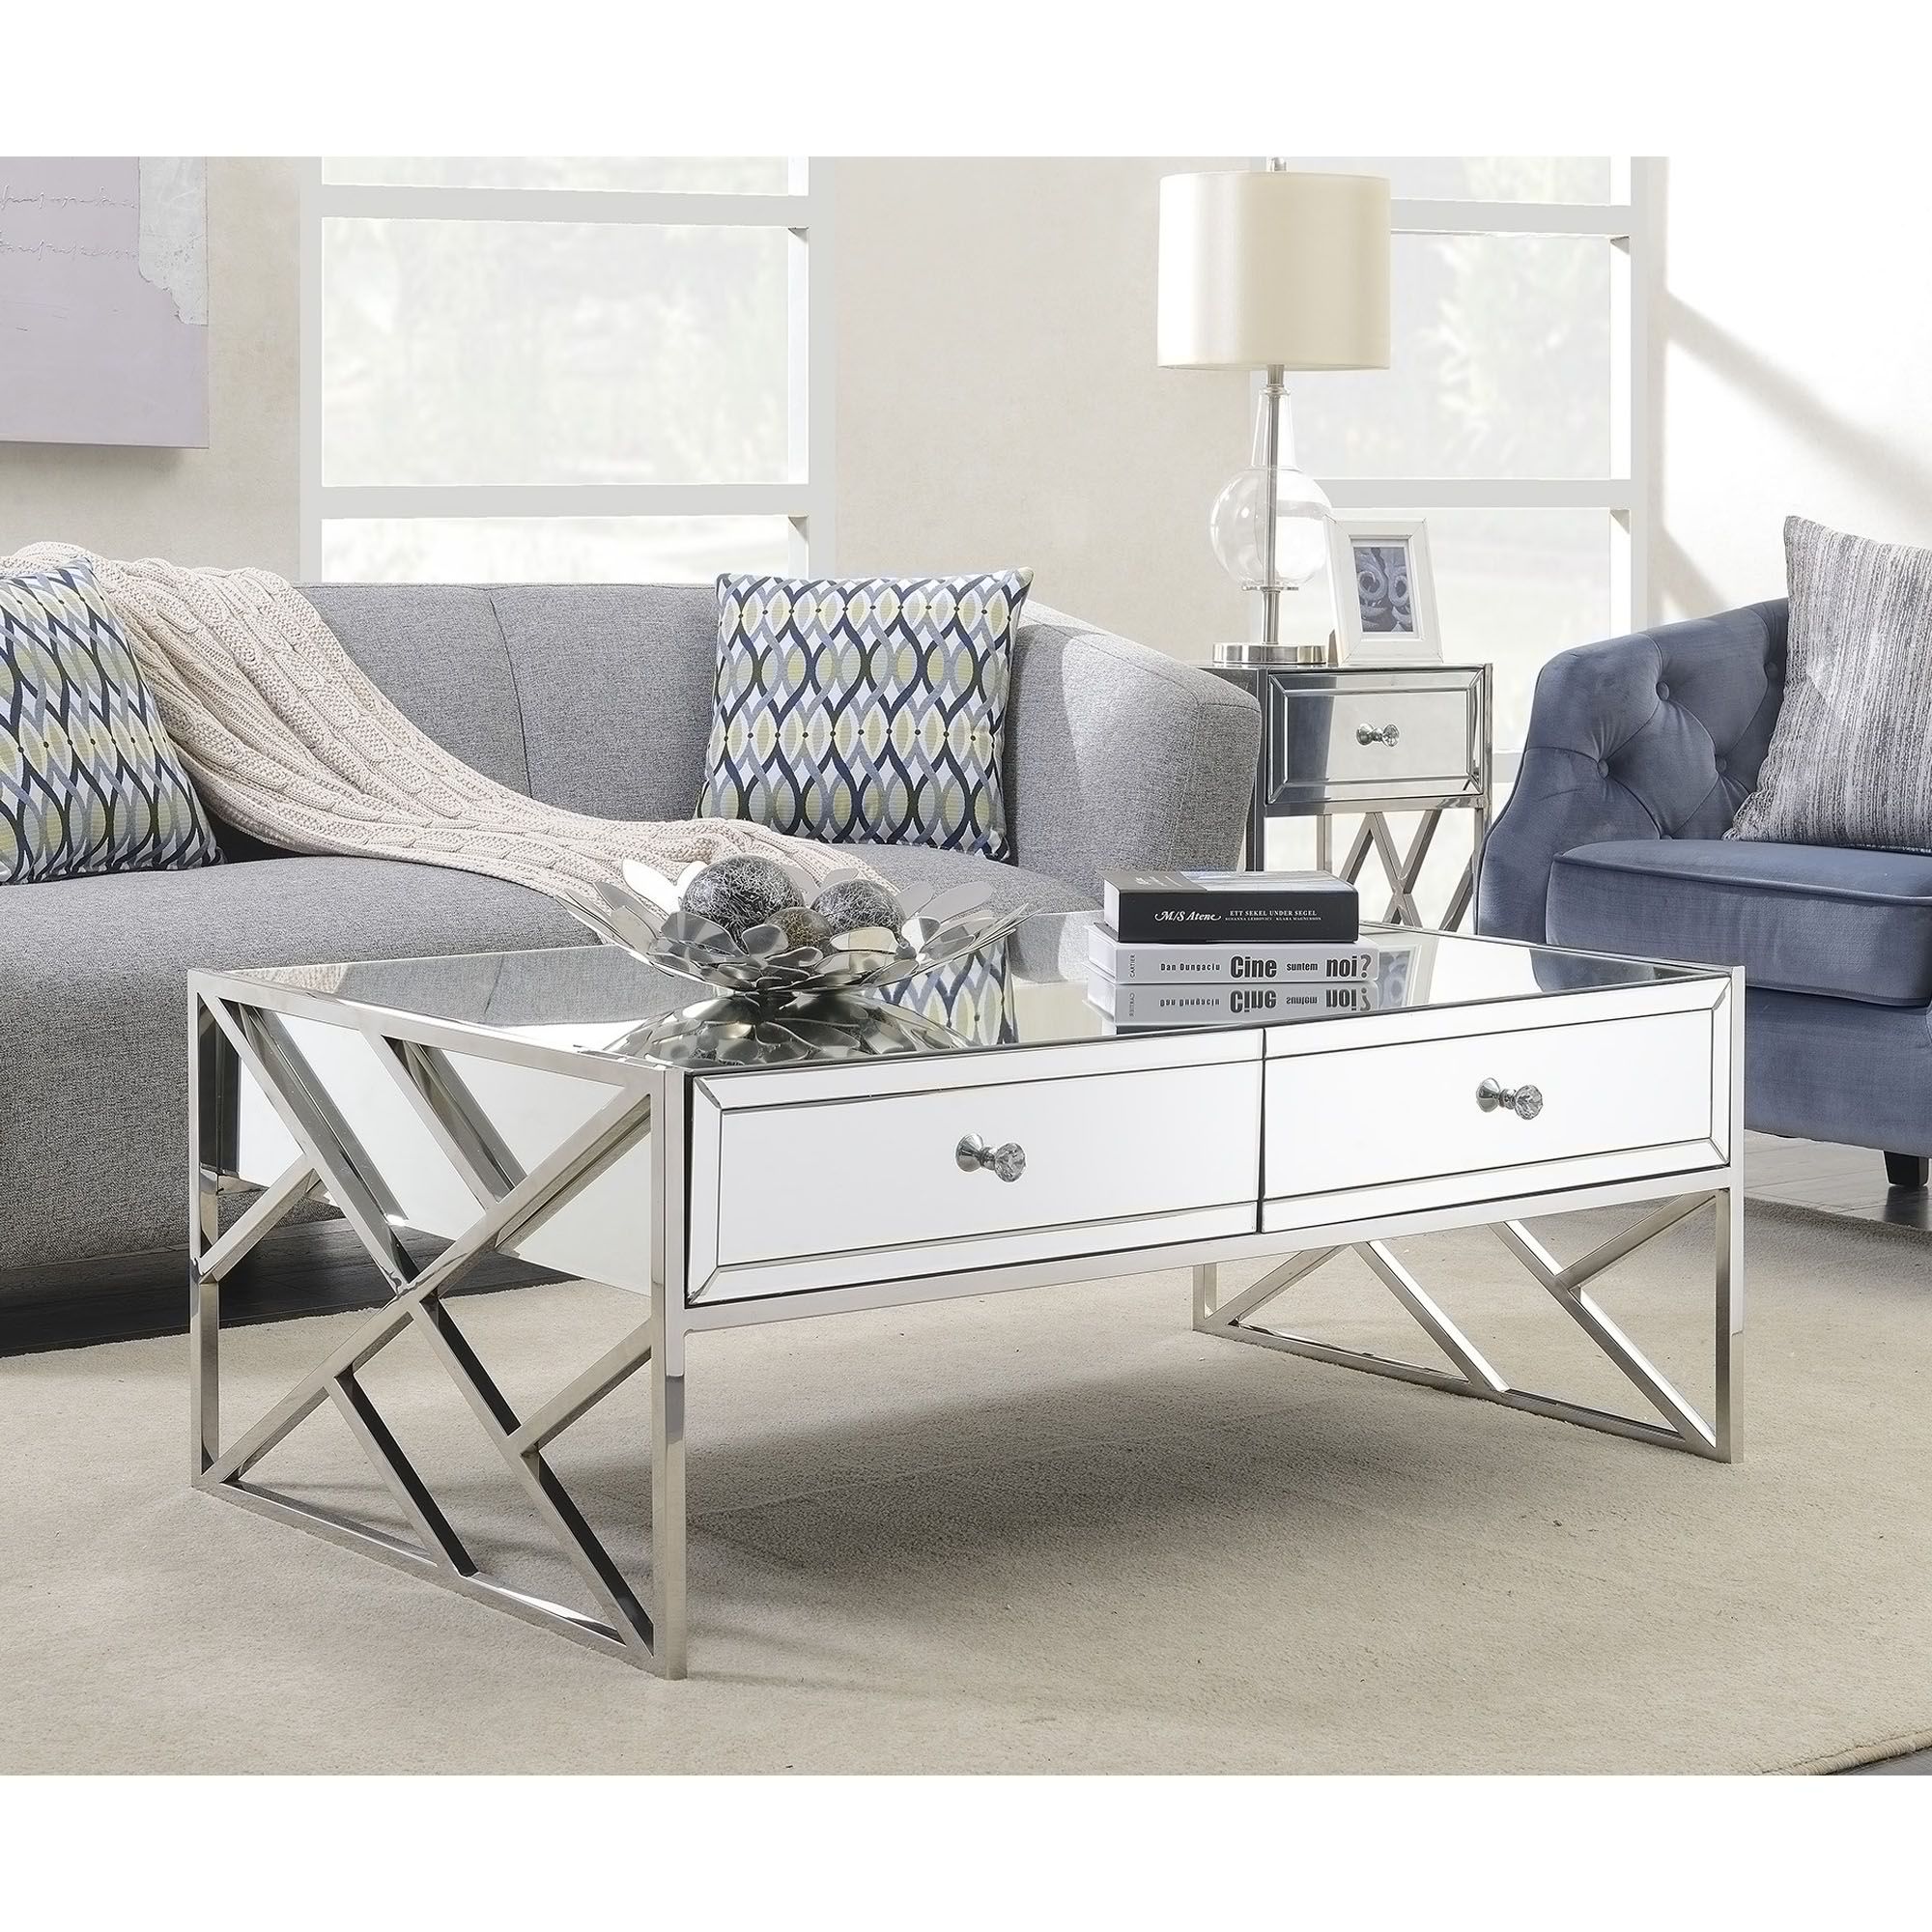 Pacific Mirrored Coffee Table | Coffee Table | Homesdirect365 Intended For Mirrored Coffee Tables (View 10 of 20)